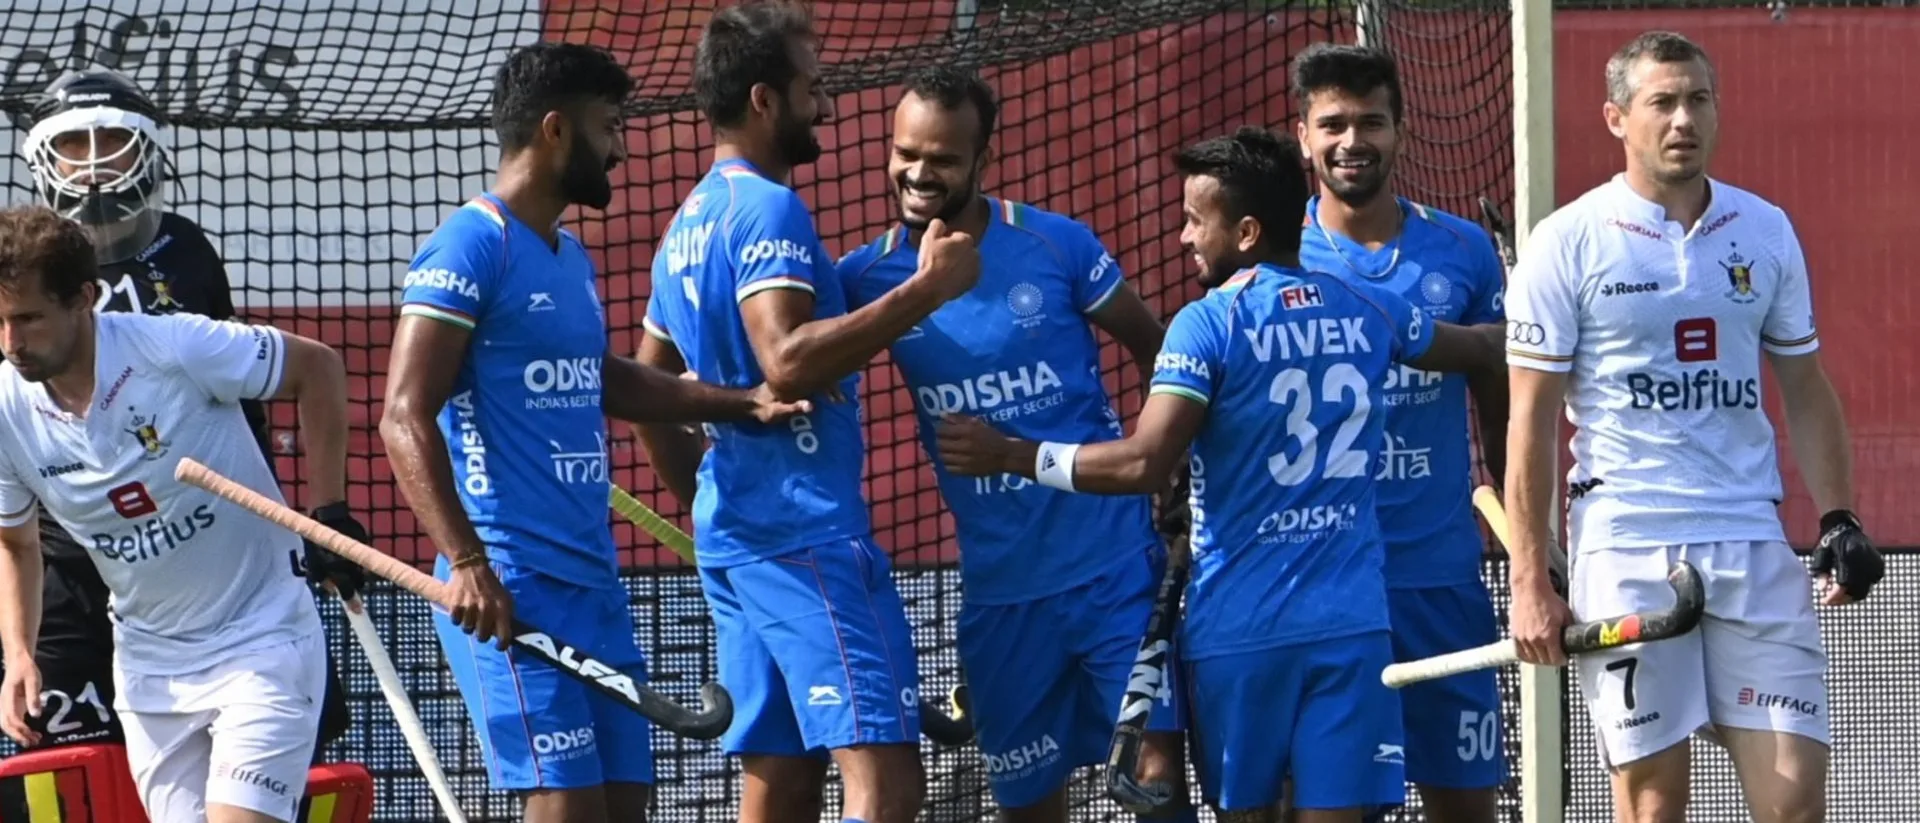 FIH Men's Hockey World Cup | Forward Lalit Upadhyay says Olympics bronze was just the beginning, wants to win WC medal too 